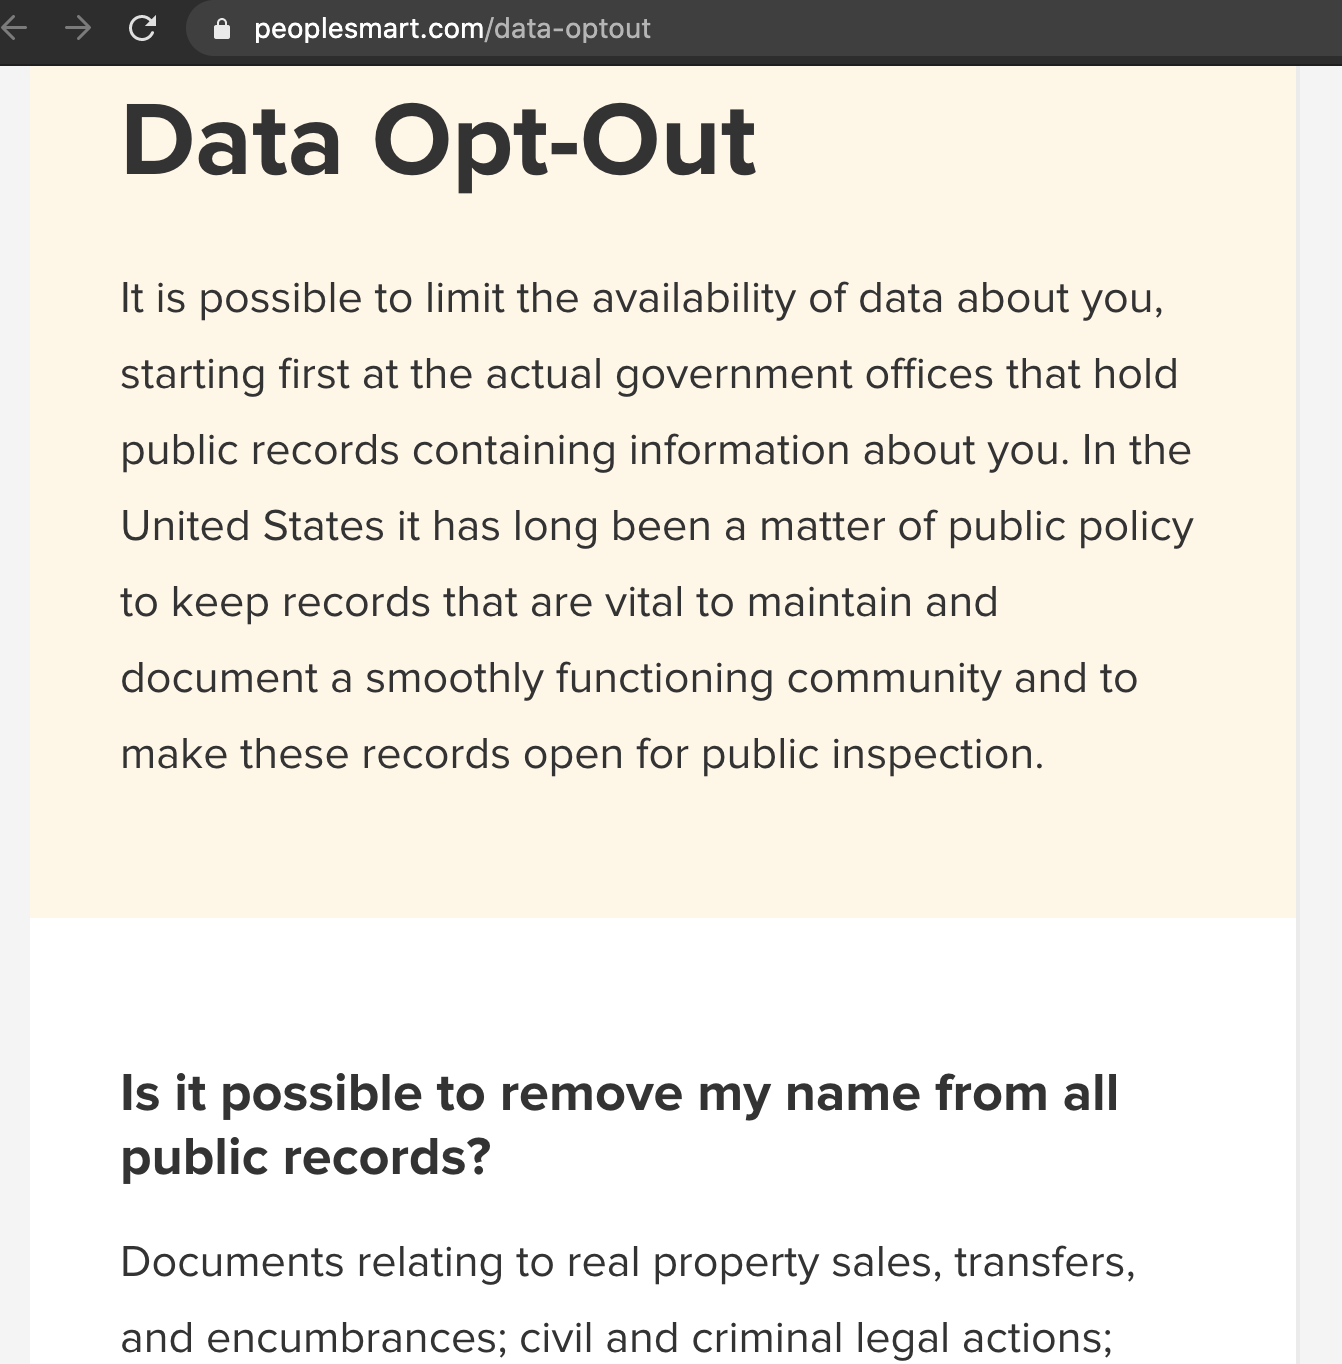 Data_Opt-Out___Privacy_Management_Information___PeopleSmart